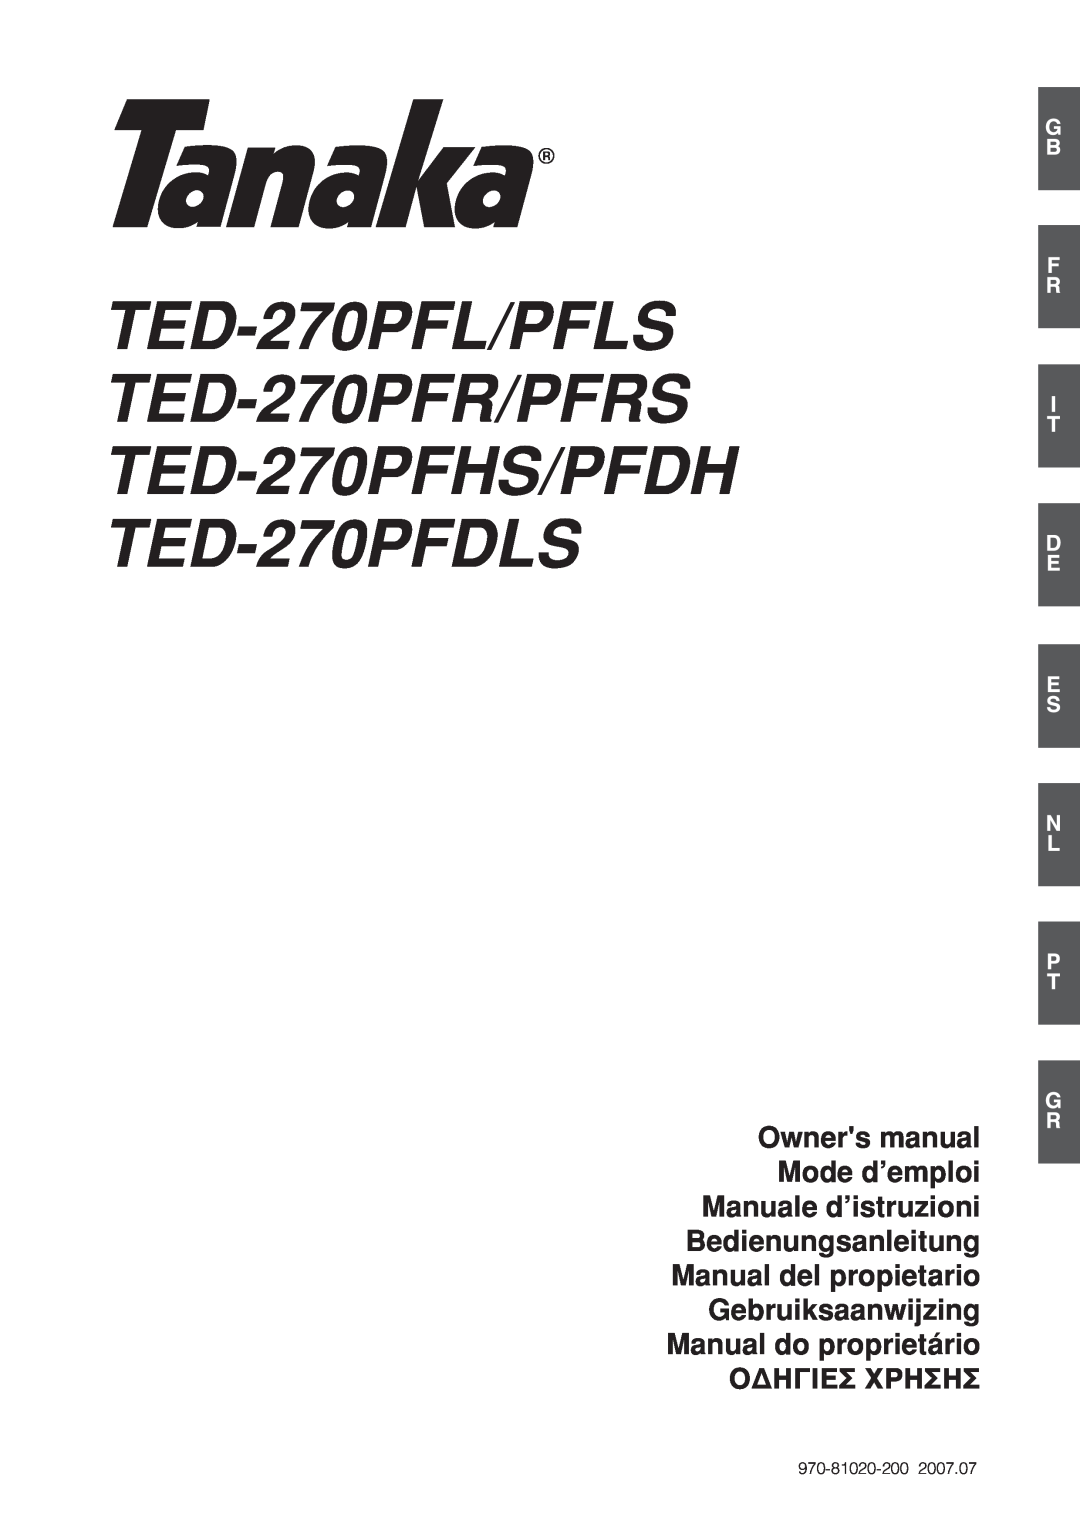 Tanaka owner manual TED-270PFL/PFLS TED-270PFR/PFRS TED-270PFHS/PFDH TED-270PFDLS, 970-81020-200 